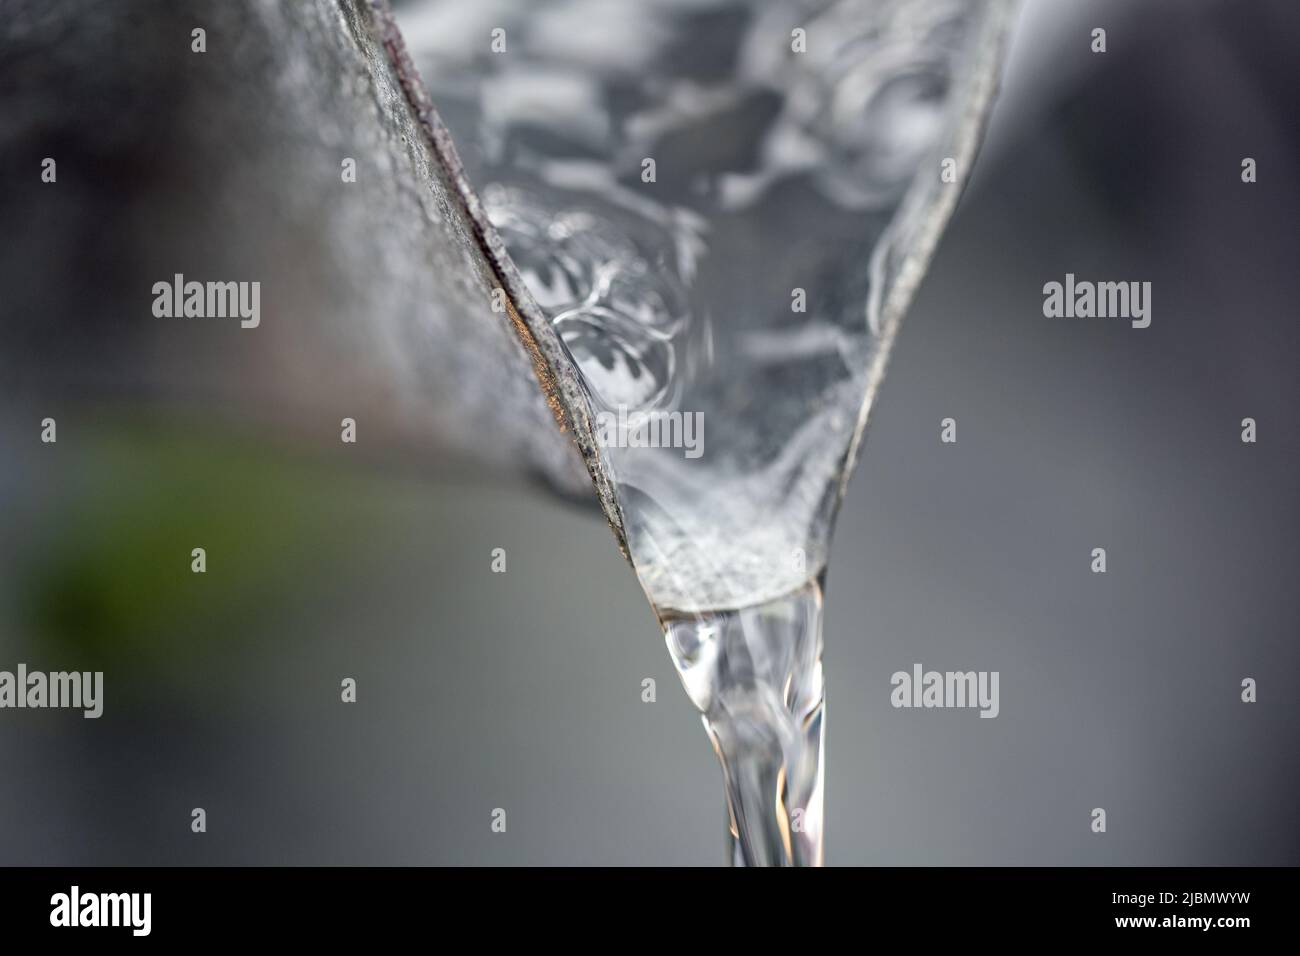 A flow of water from the spout of a water feature, shot close up in landscape format Stock Photo